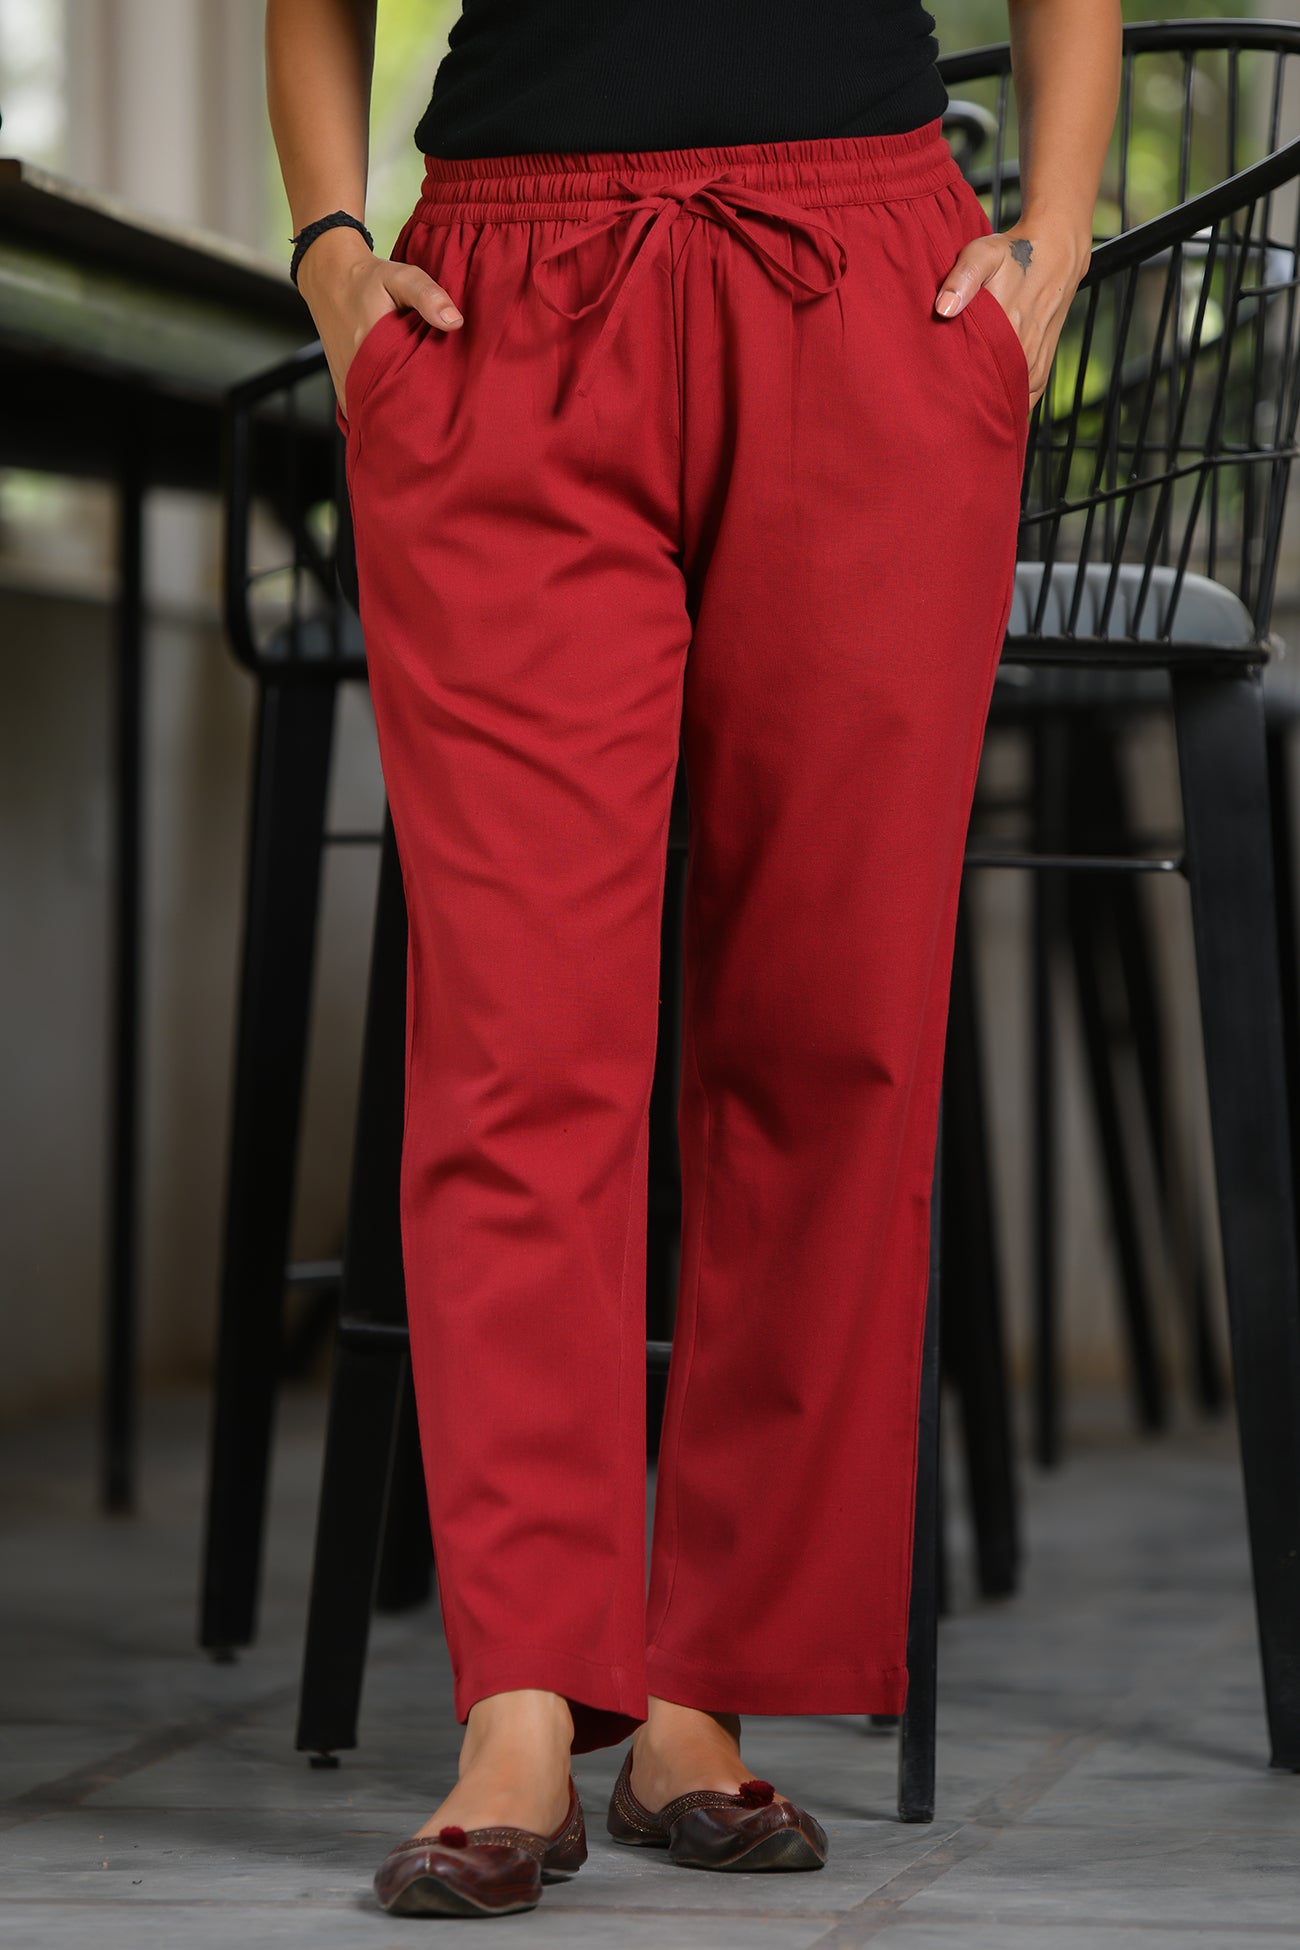 Kylie Jenner Deep Red Leather Straight Fit Trousers Autumn Winter 2019   SASSY DAILY Fashion News